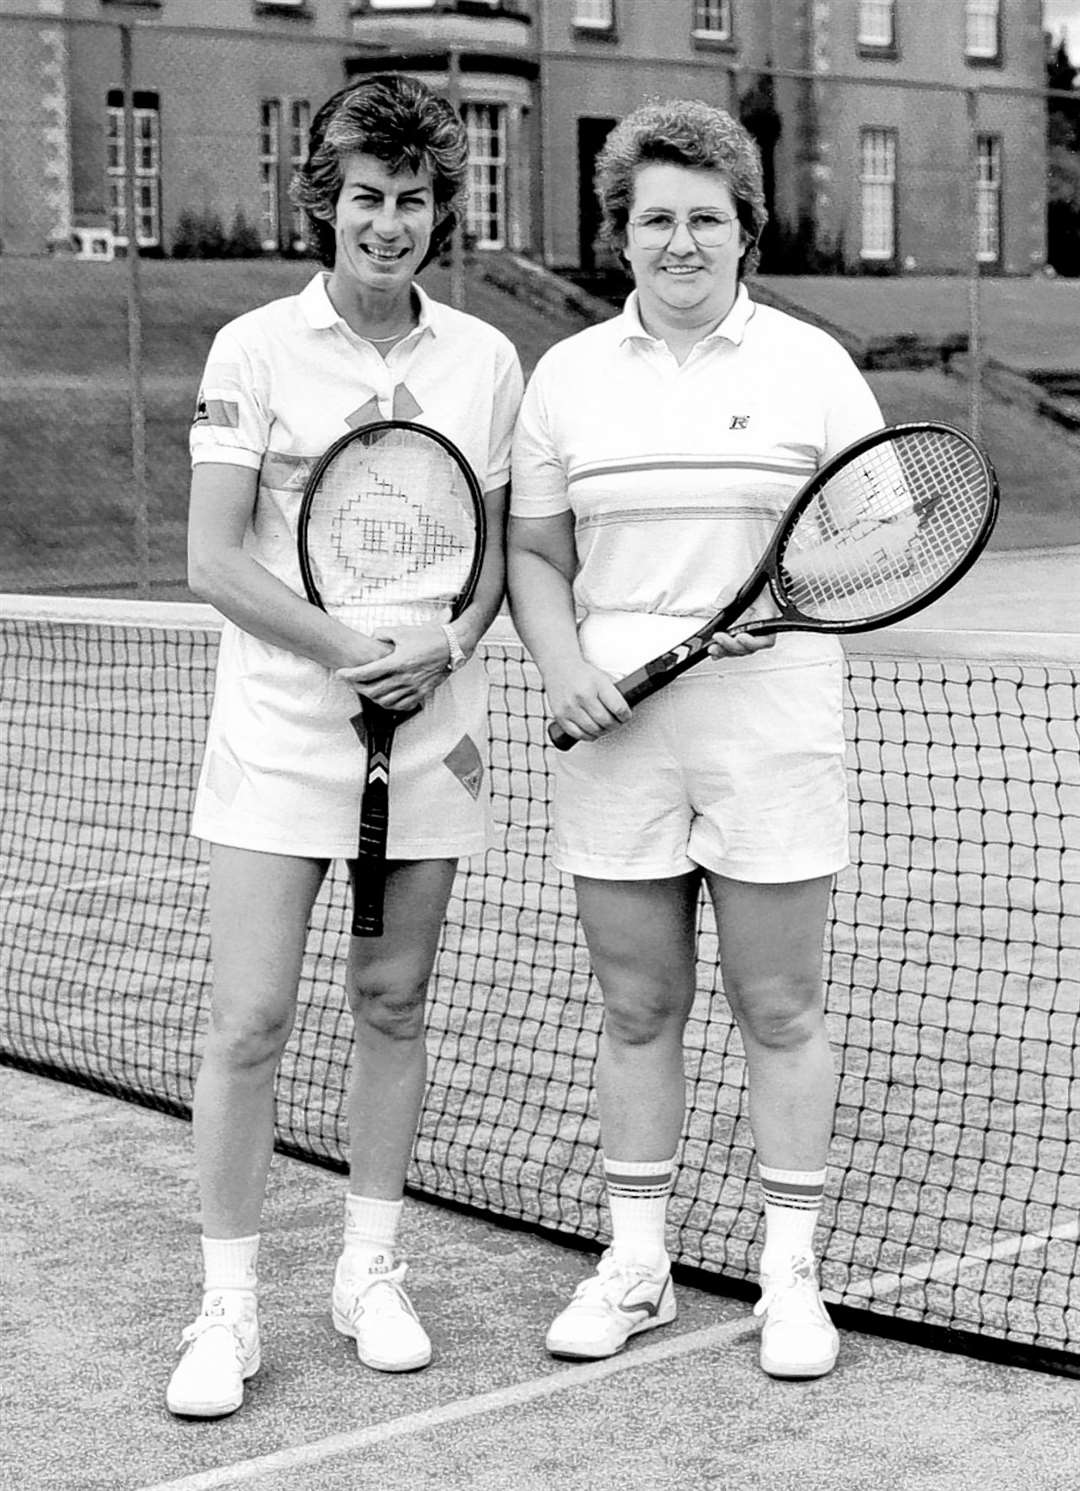 The late Anne Dunnett, former Lord-Lieutenant, with Virginia Wade (left) at a tennis coaching session at Gleneagles in 1987. This was 10 years after Virginia had won the ladies’ singles title at Wimbledon.